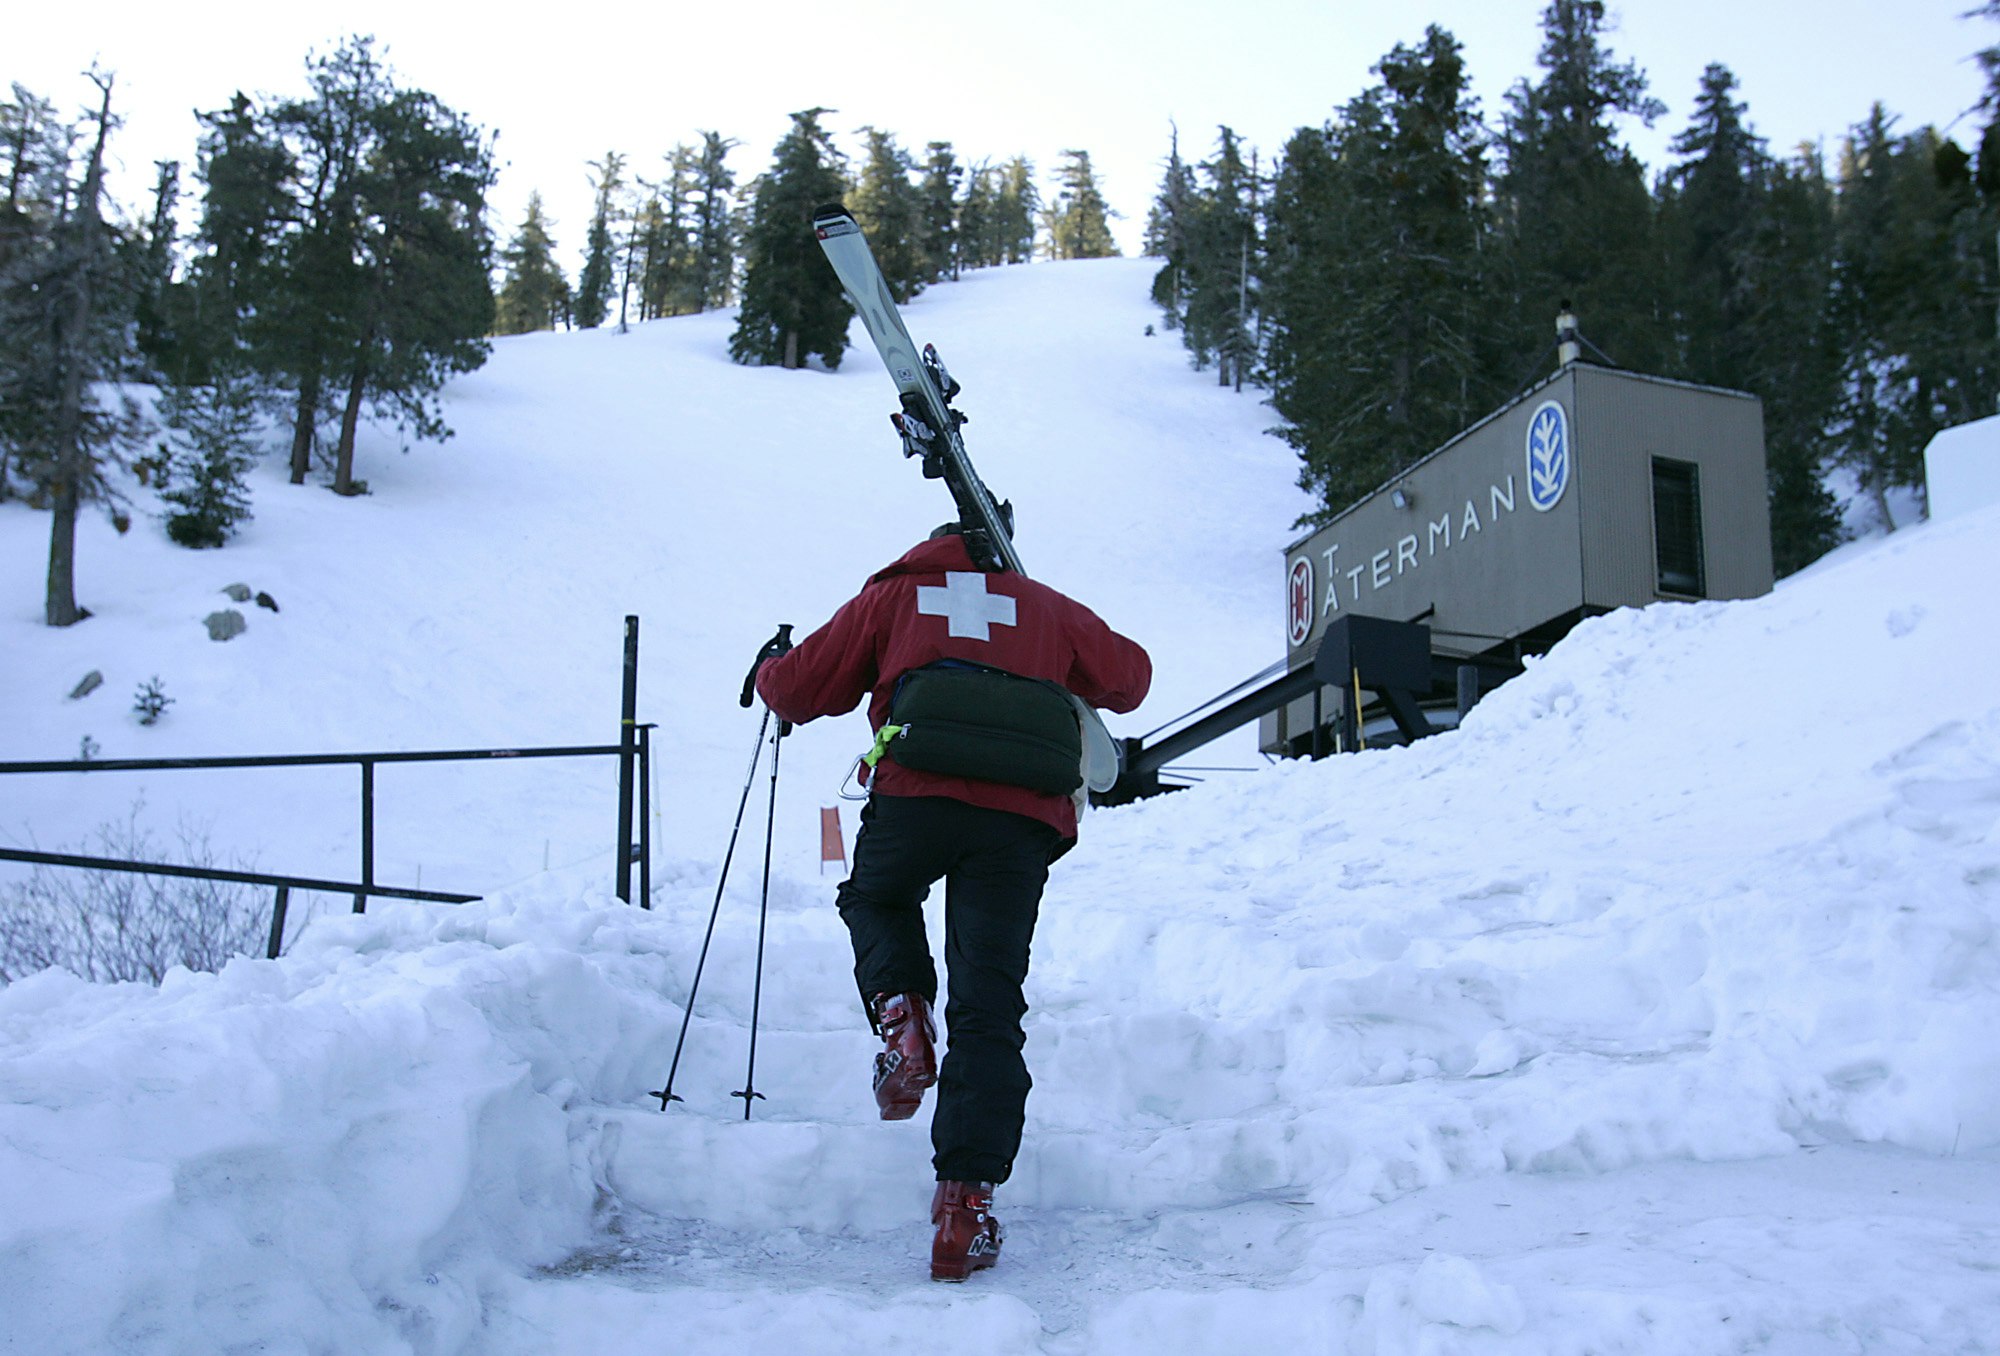 A member of the Mt. Waterman ski patrol in black snow pants, a red ski jacket with a white cross on the back, red boots, and a black fanny pack climbs snowy steps in front of a brown warming hut that reads Aterman in white san serif letters. A snow hill free of tracks rises above the patrolman